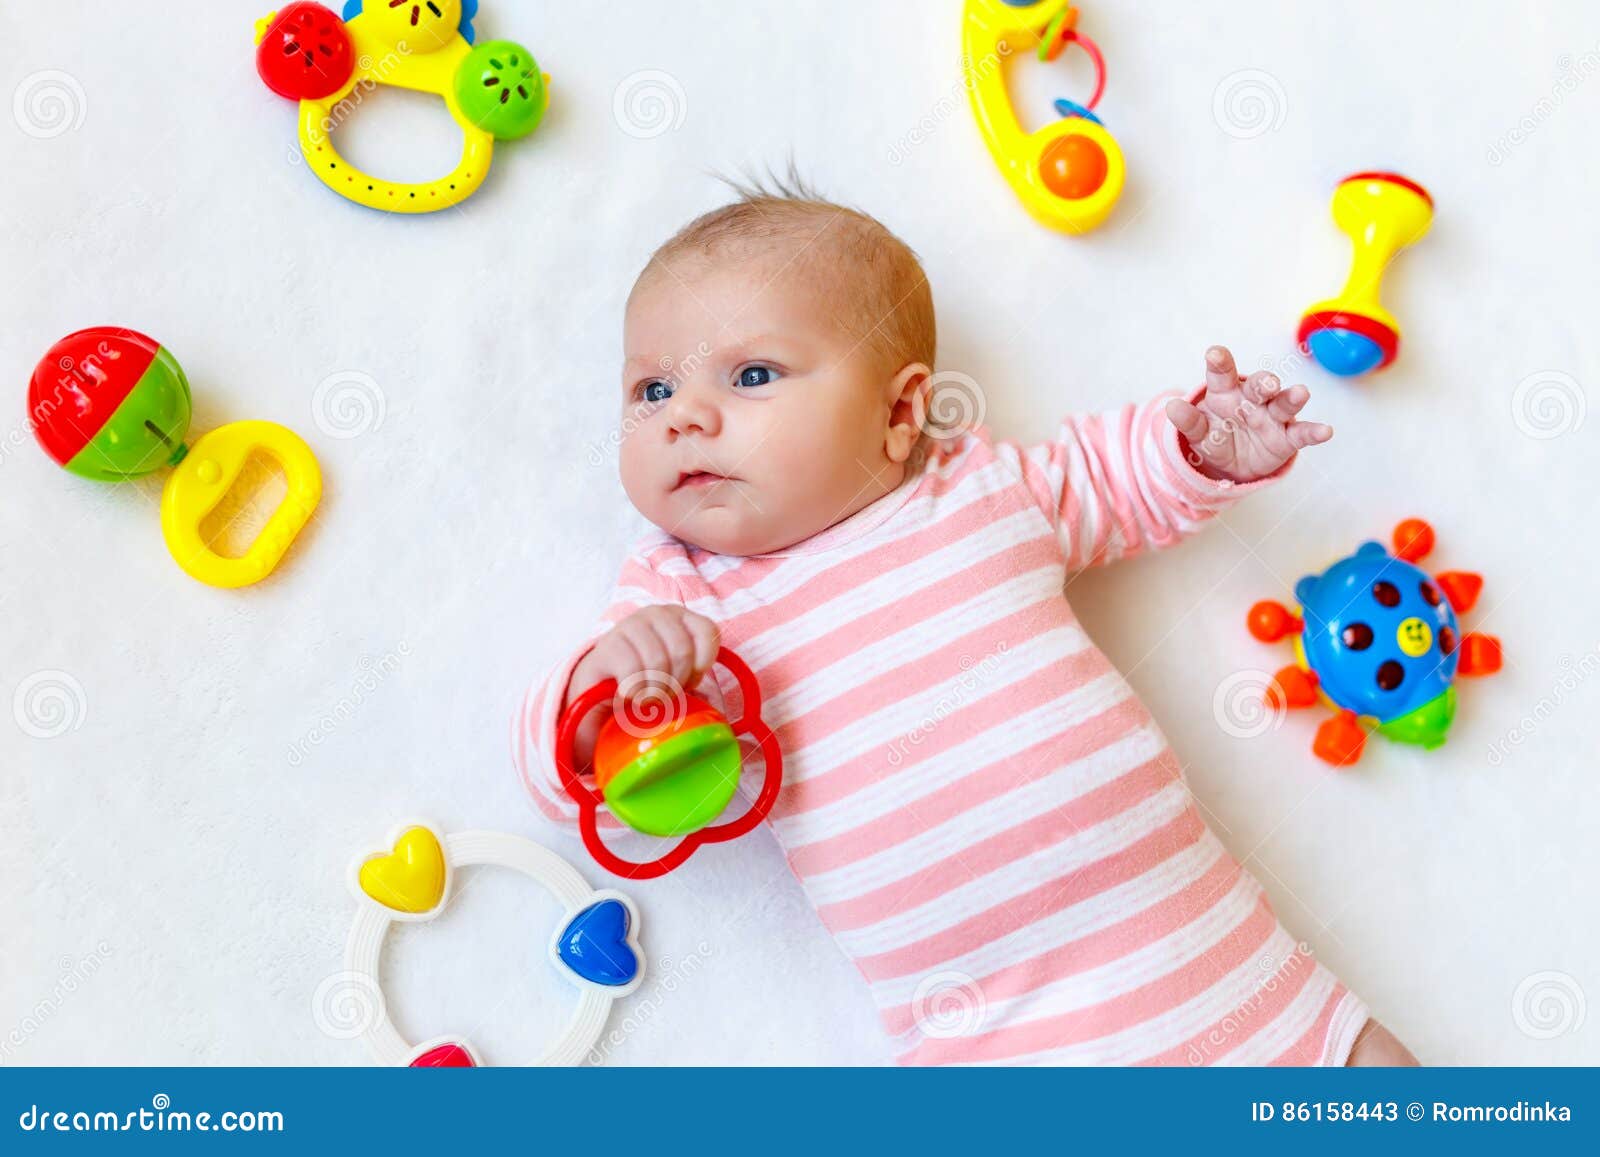 Cute Baby Girl Playing with Colorful Rattle Toys Stock Image - Image of ...